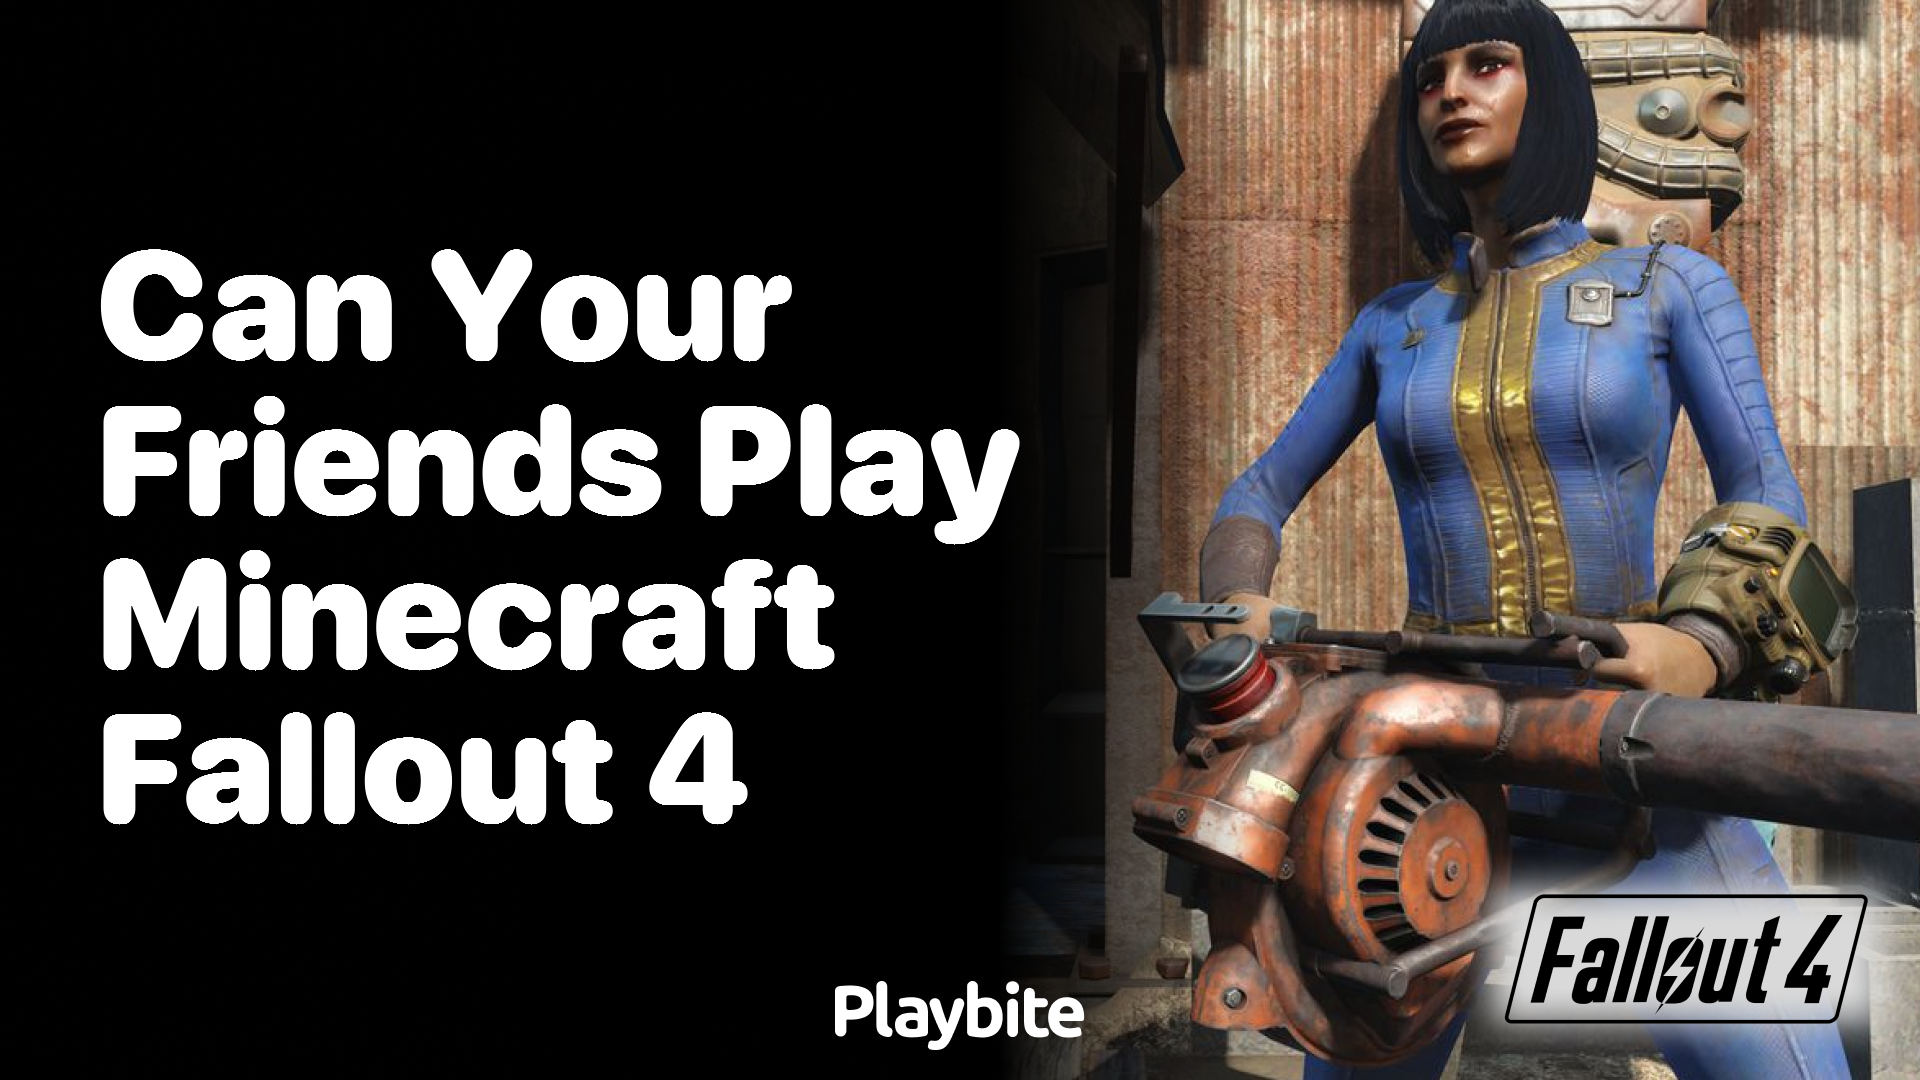 Can Your Friends Play Minecraft Fallout 4 Together?